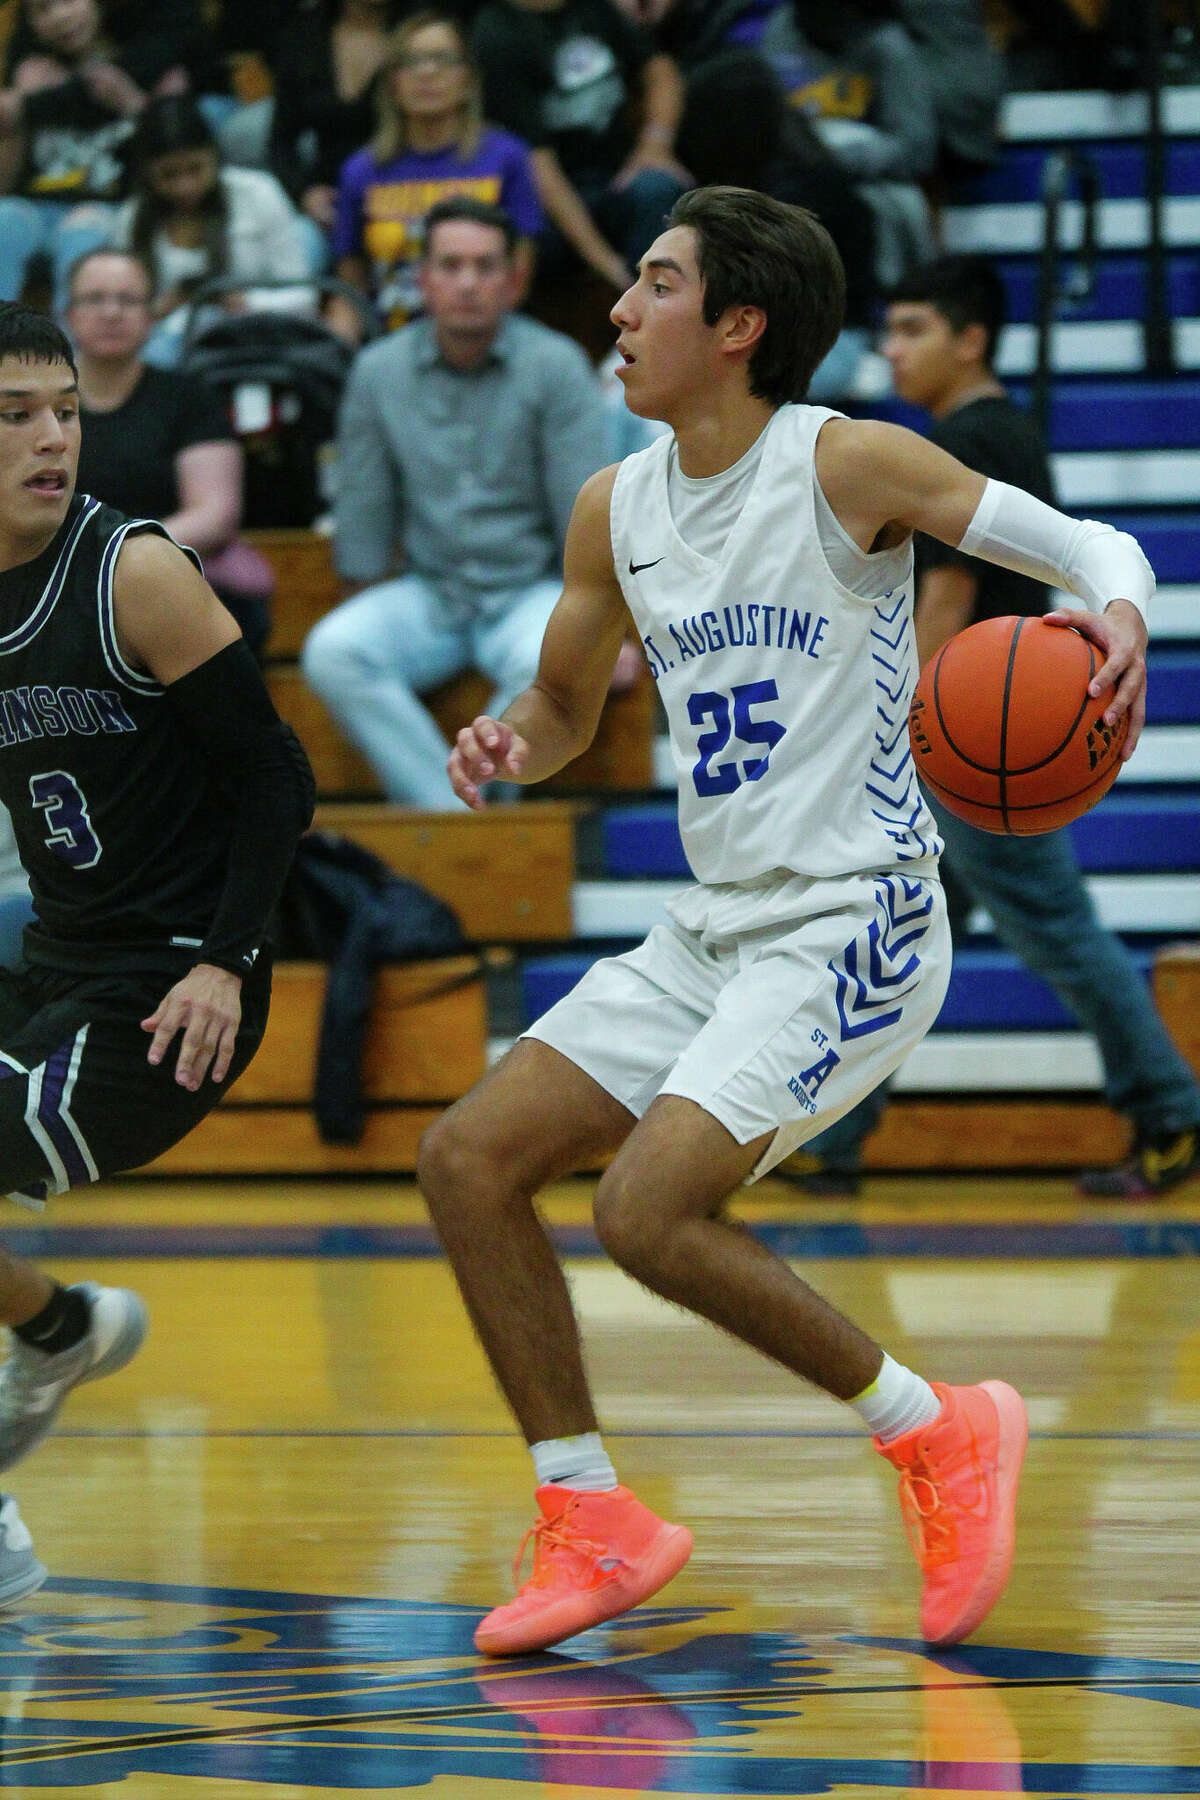 St. Augustine's Octavio Benavides was named to the TAPPS 5A All-State second team on Tuesday.